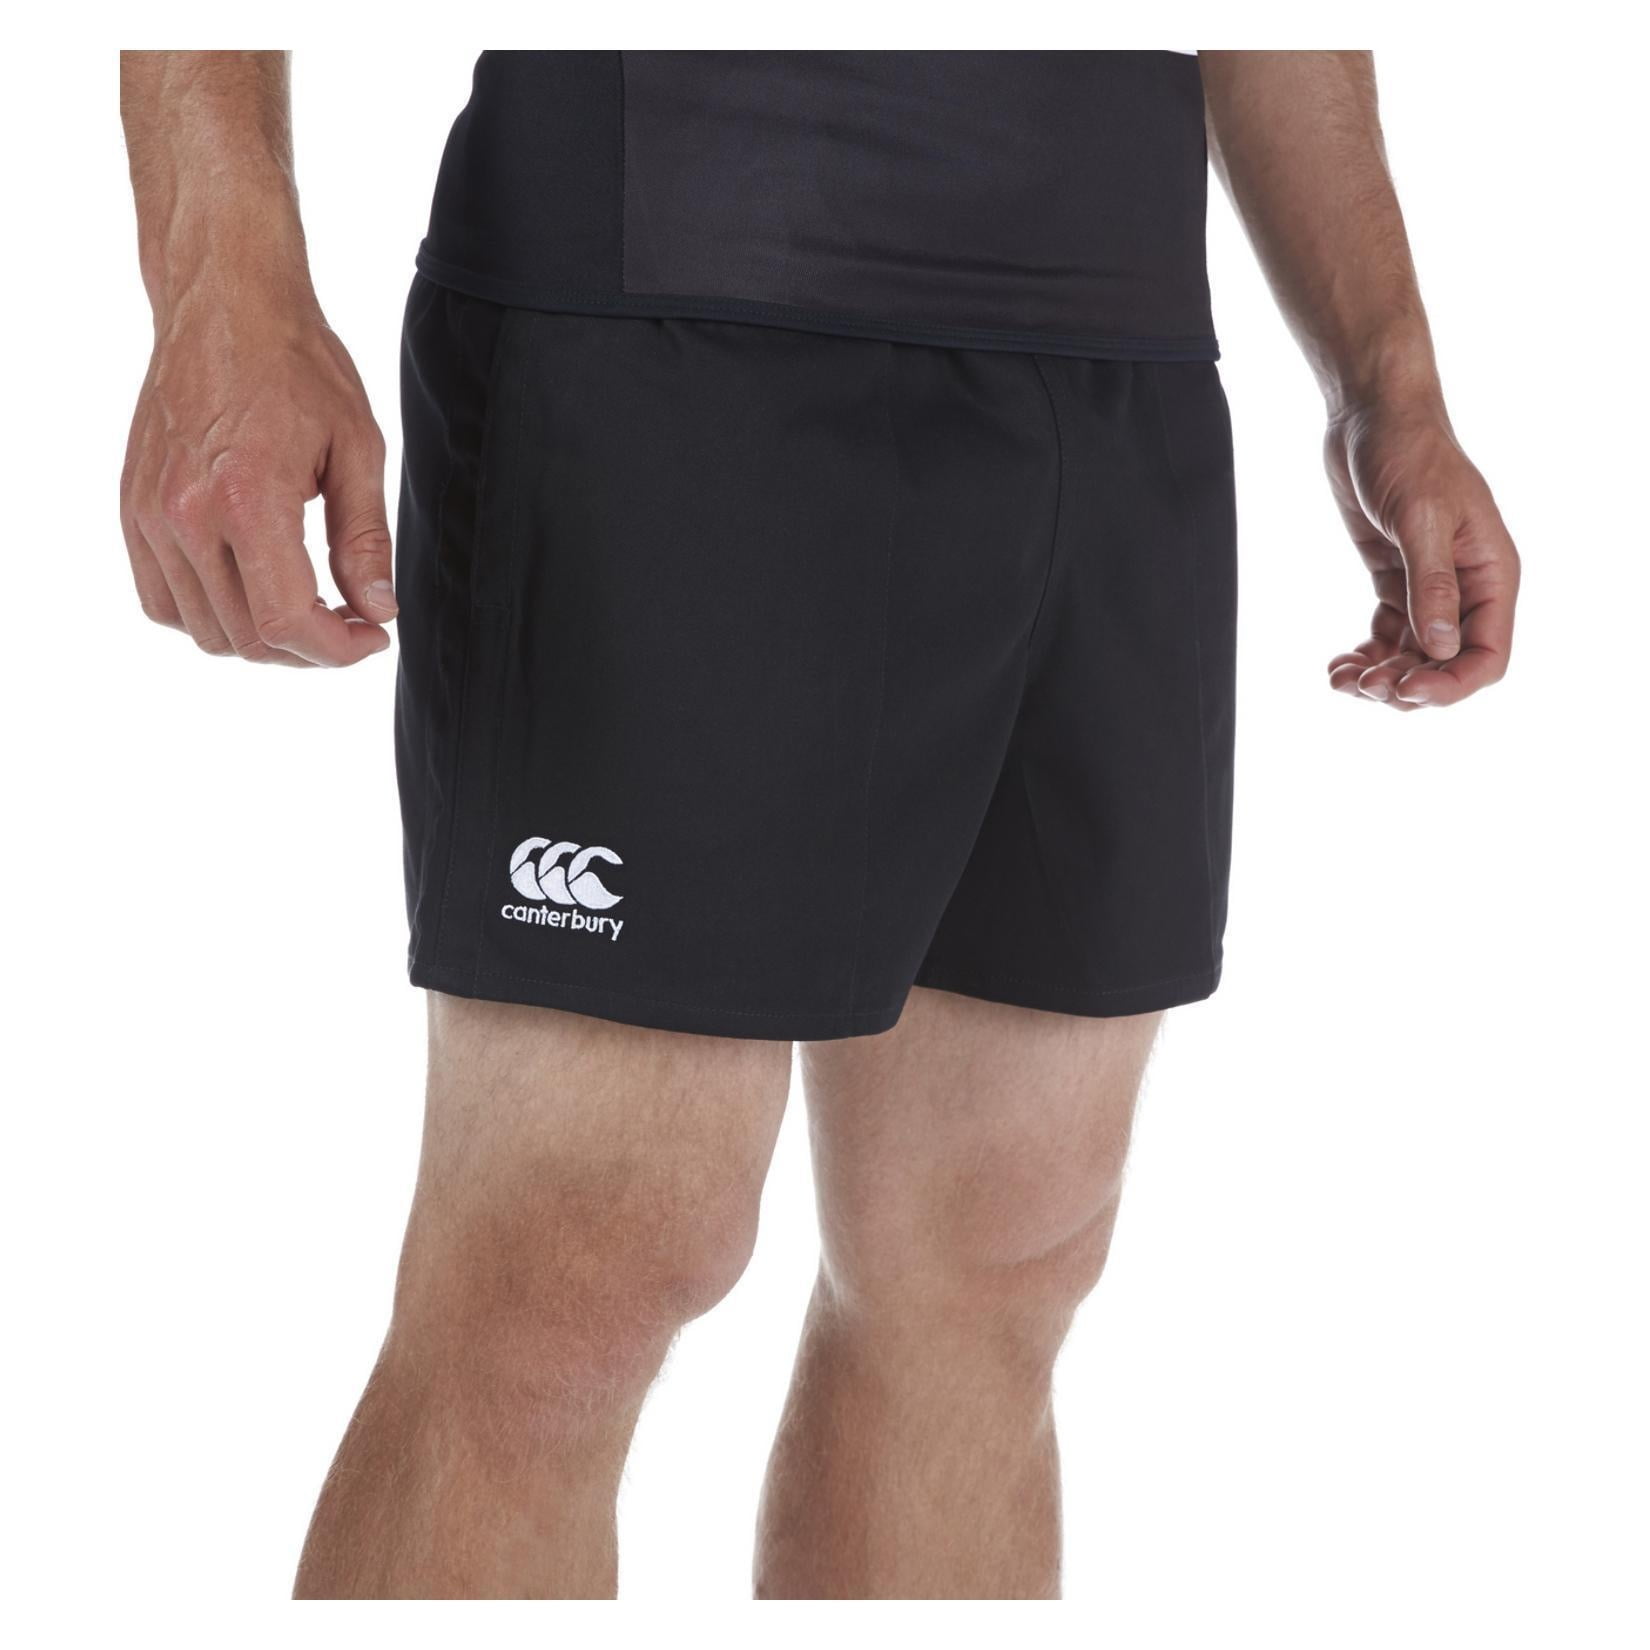 Mens Rugby Shorts 100% Premium Cotton Gym Leisure Fitness Training Active Wear 